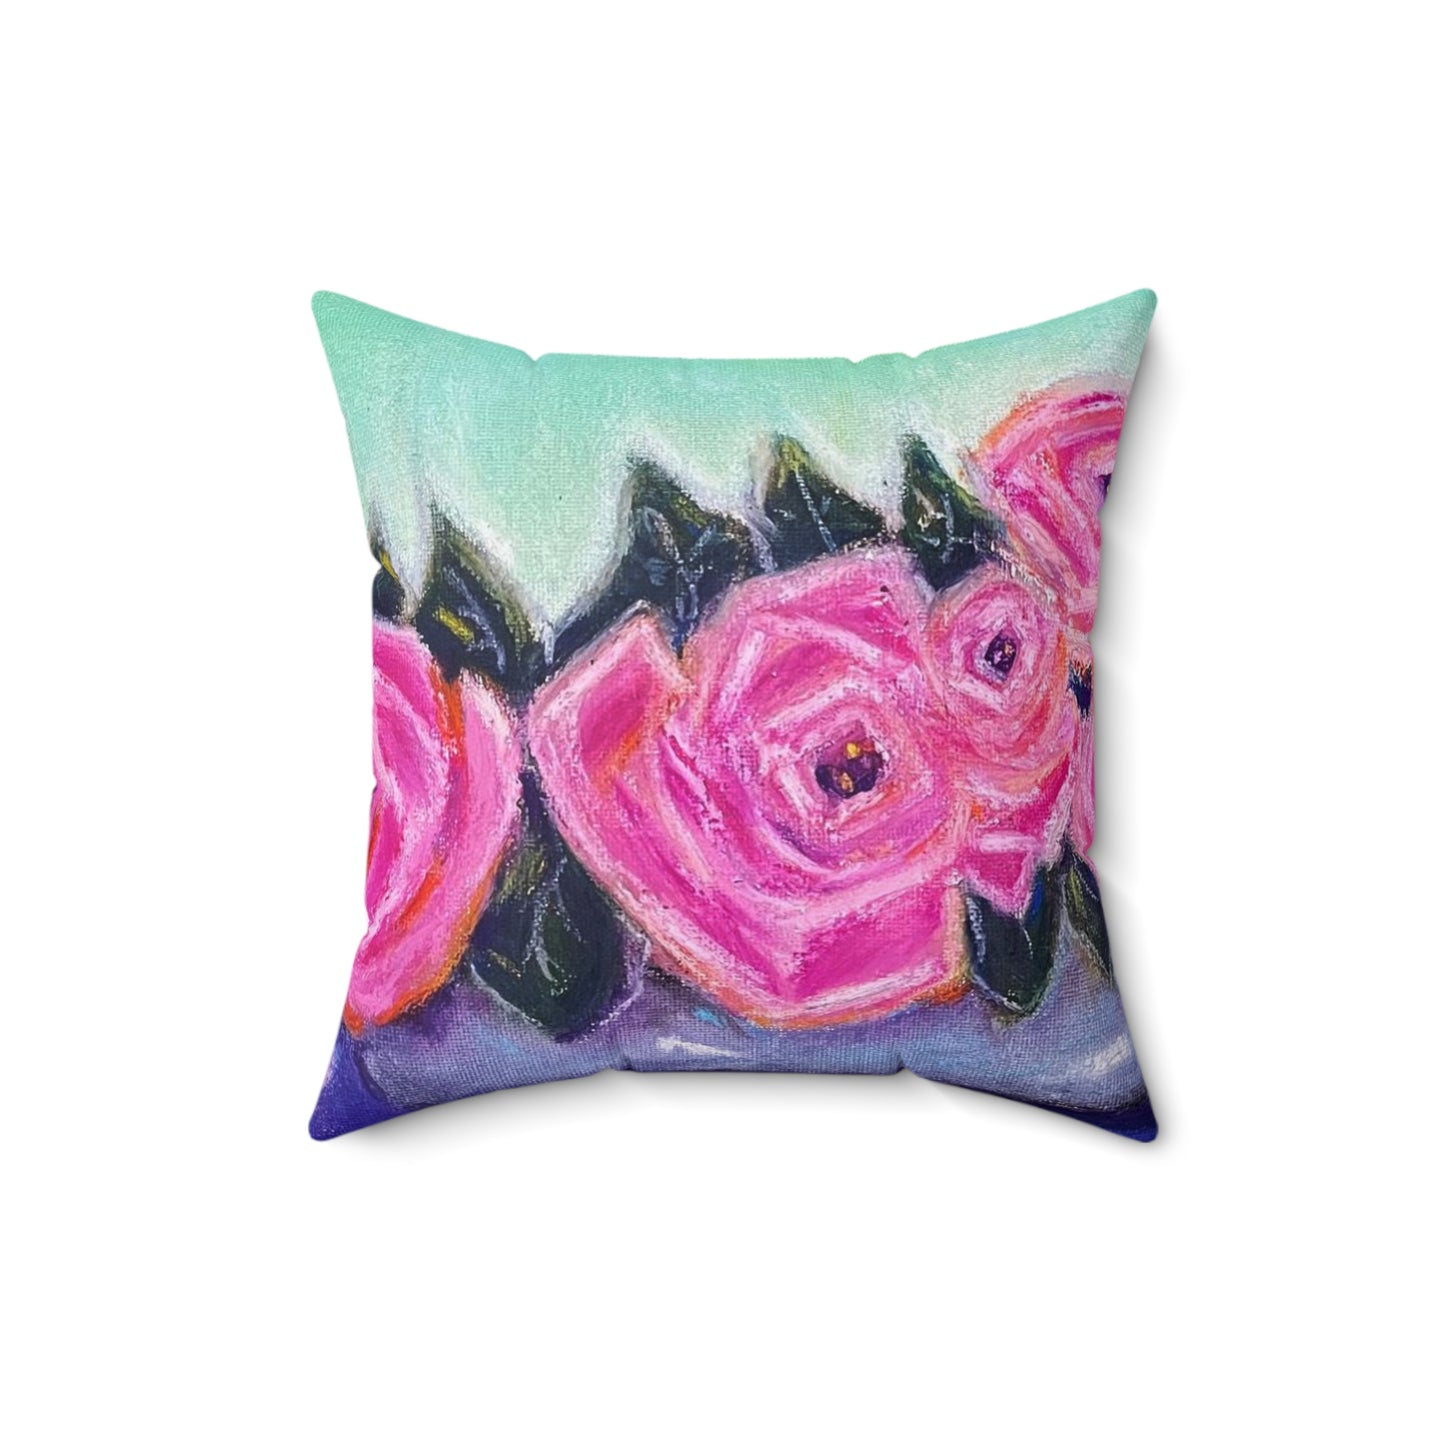 Tin Full of Roses Indoor Spun Polyester Square Pillow